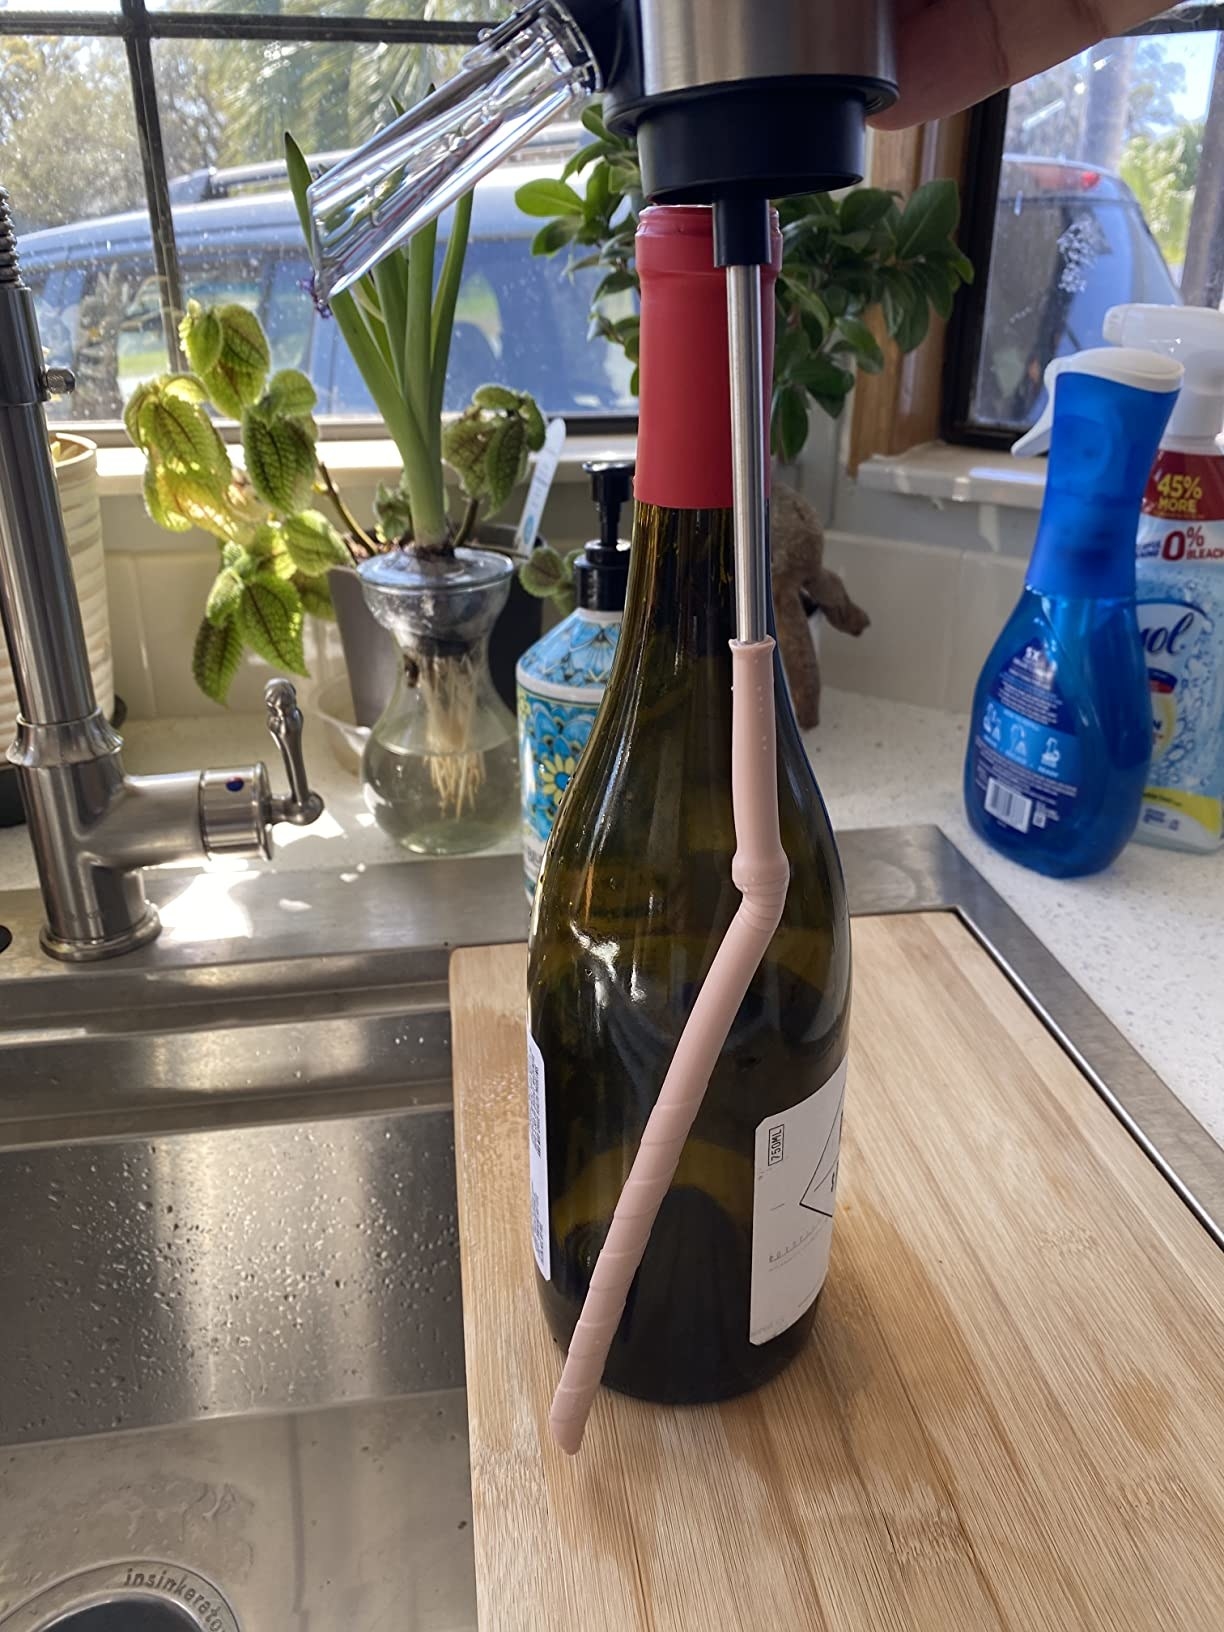 The wine aerator in a bottle of red wine